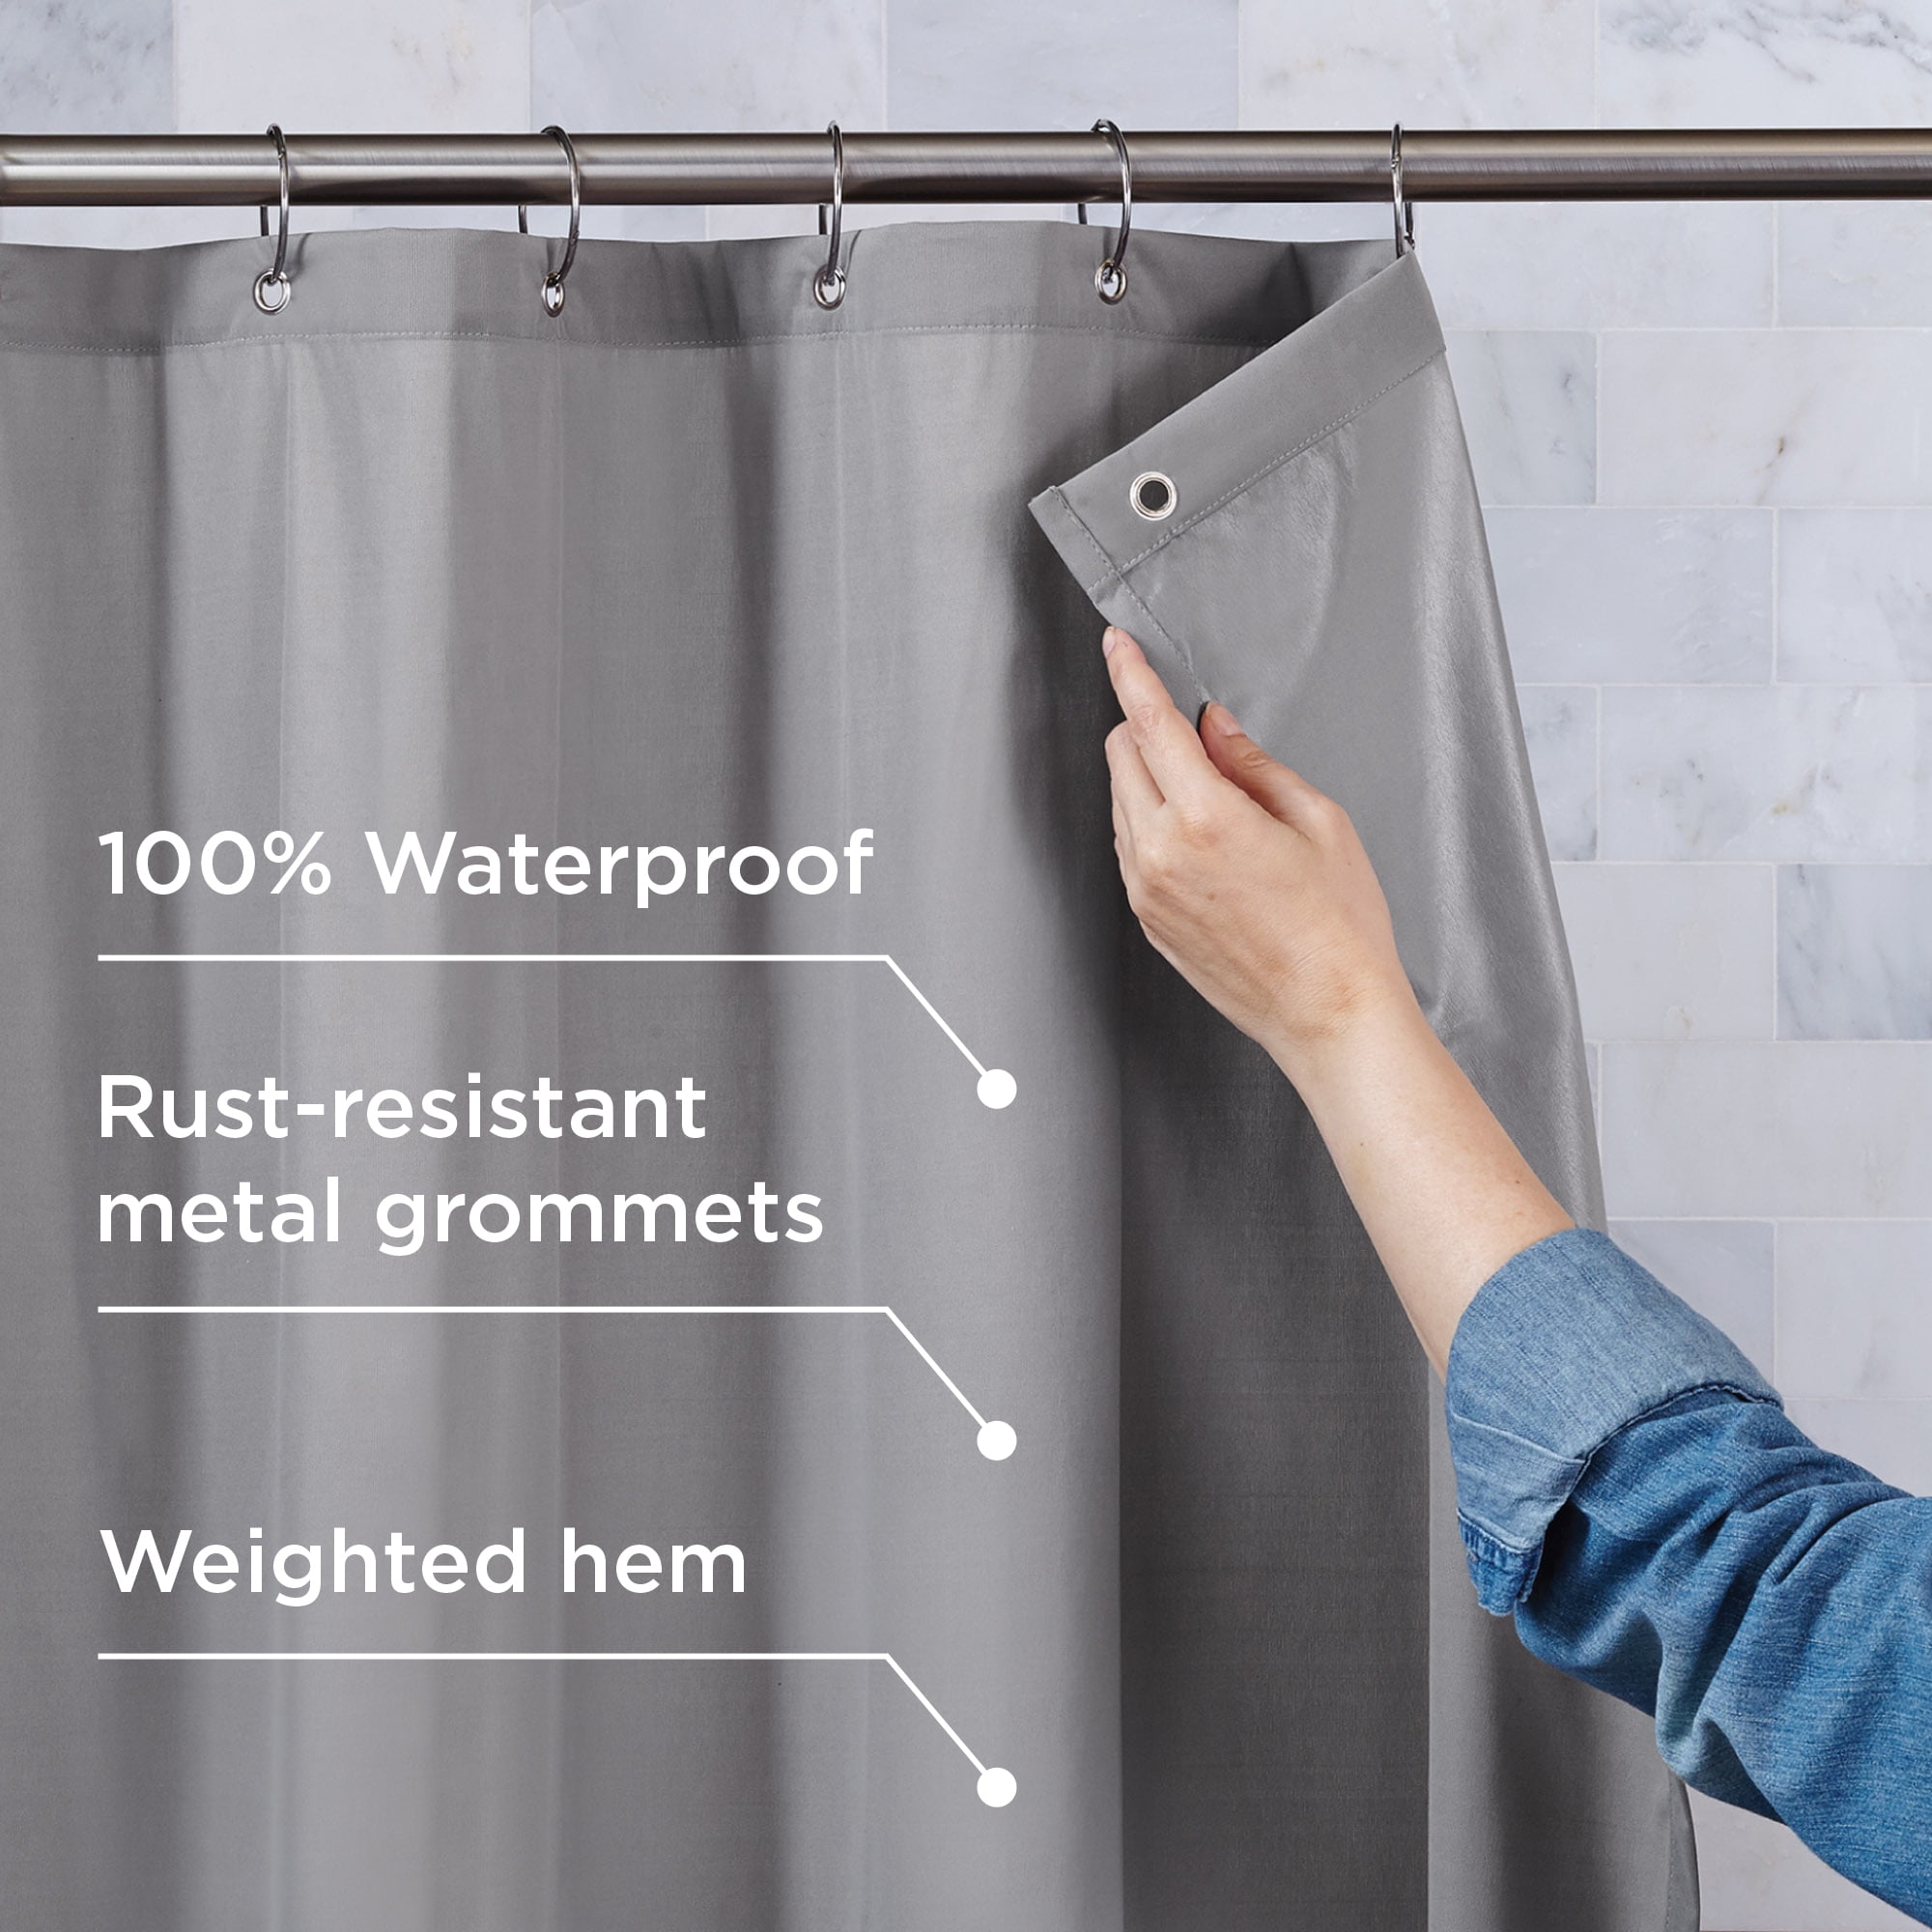 Waterproof Fabric Shower Curtain Or, Organic Cotton Shower Curtain Liner